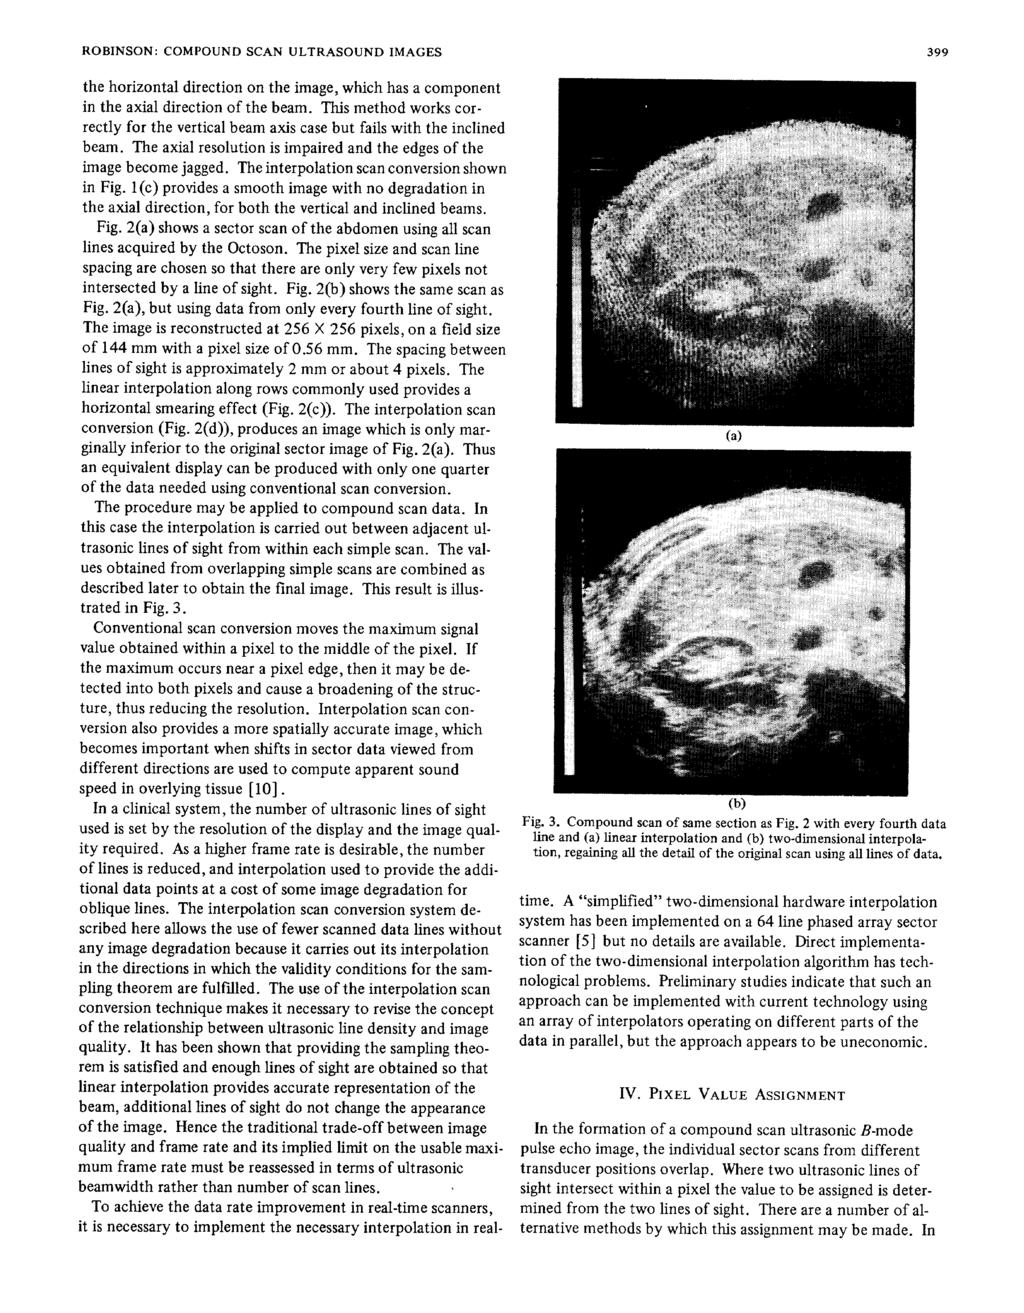 ROBINSON: COMPOUND SCAN ULTRASOUND IMAGES 399 the horizontal direction on the image, which has a component in the axial direction of the beam.